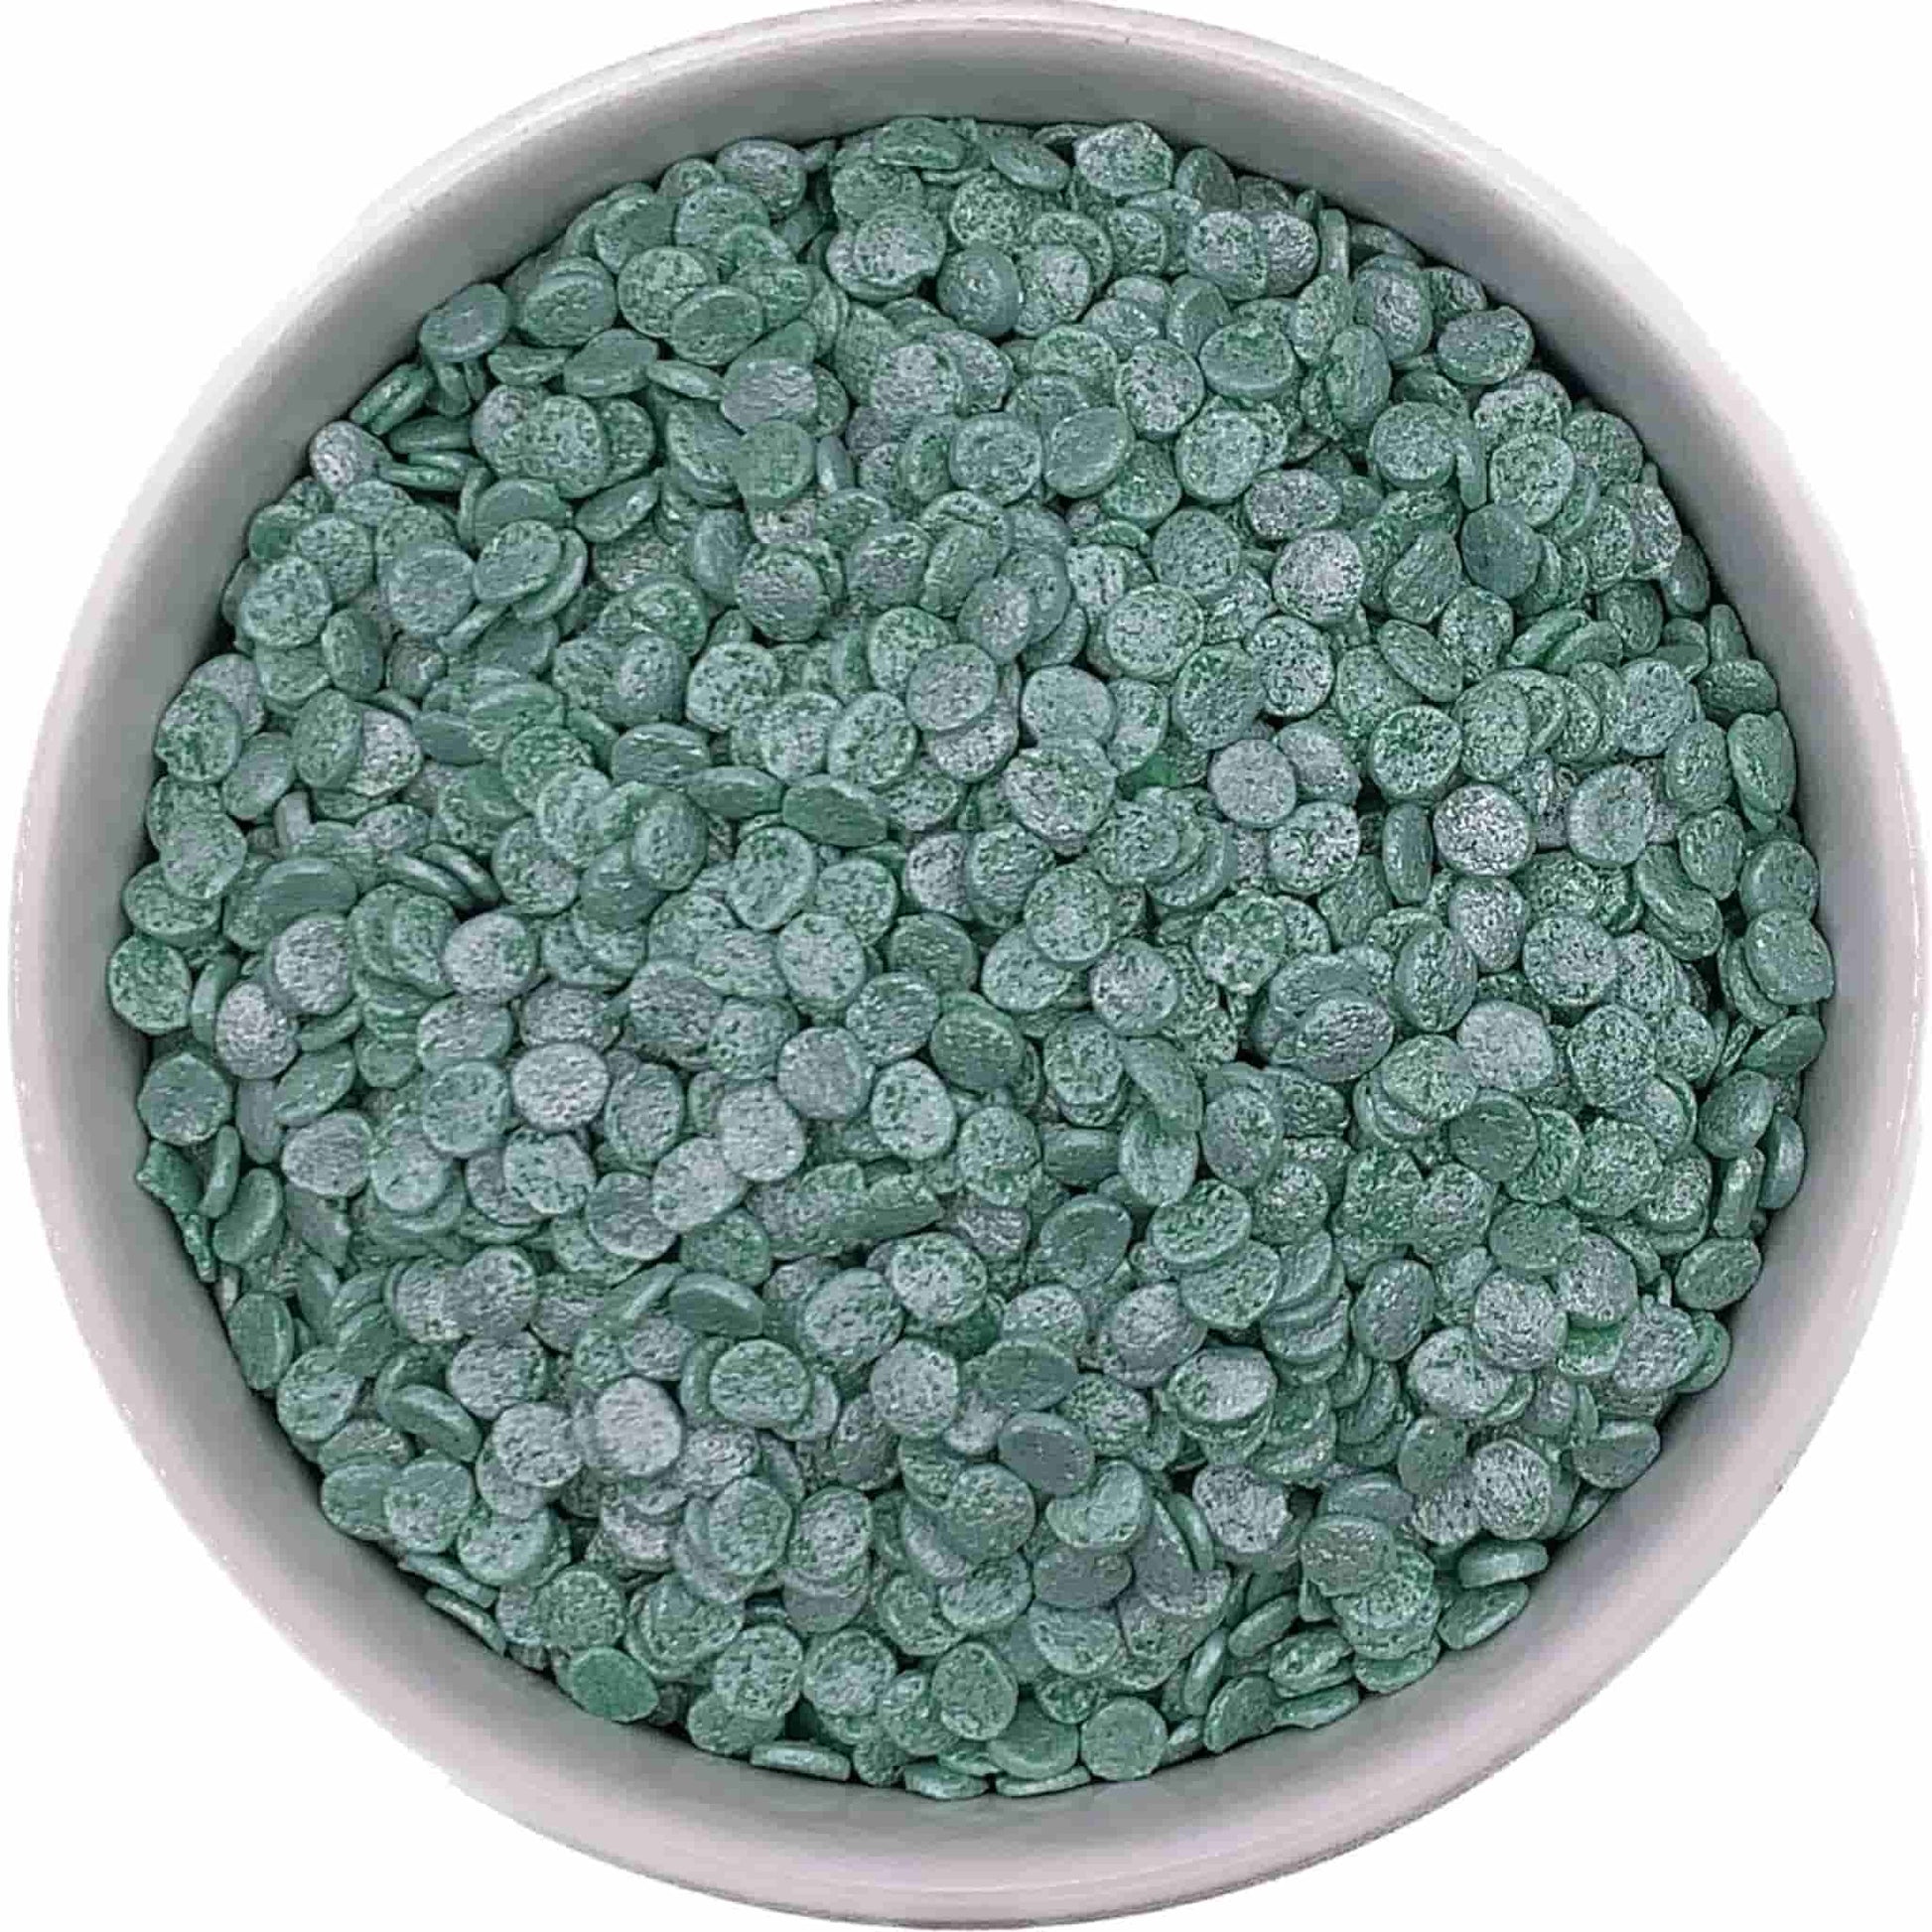 Green pearl confetti sprinkles, a shiny edible decoration for enhancing the appearance of baked goods.